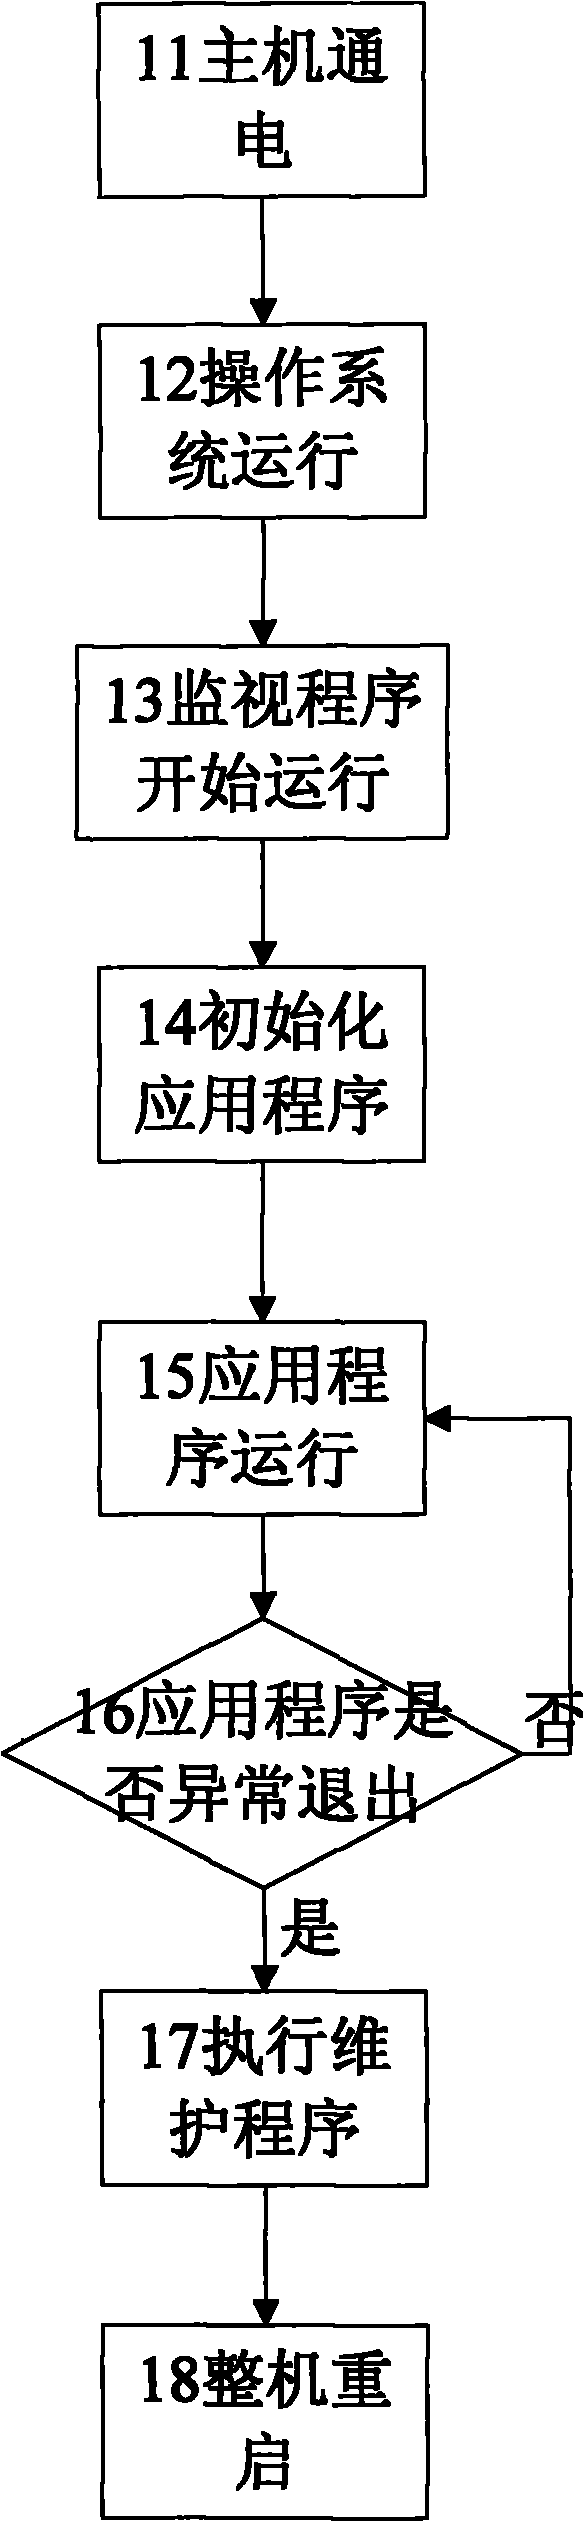 Equipment and method for maintaining and updating system through interface medium